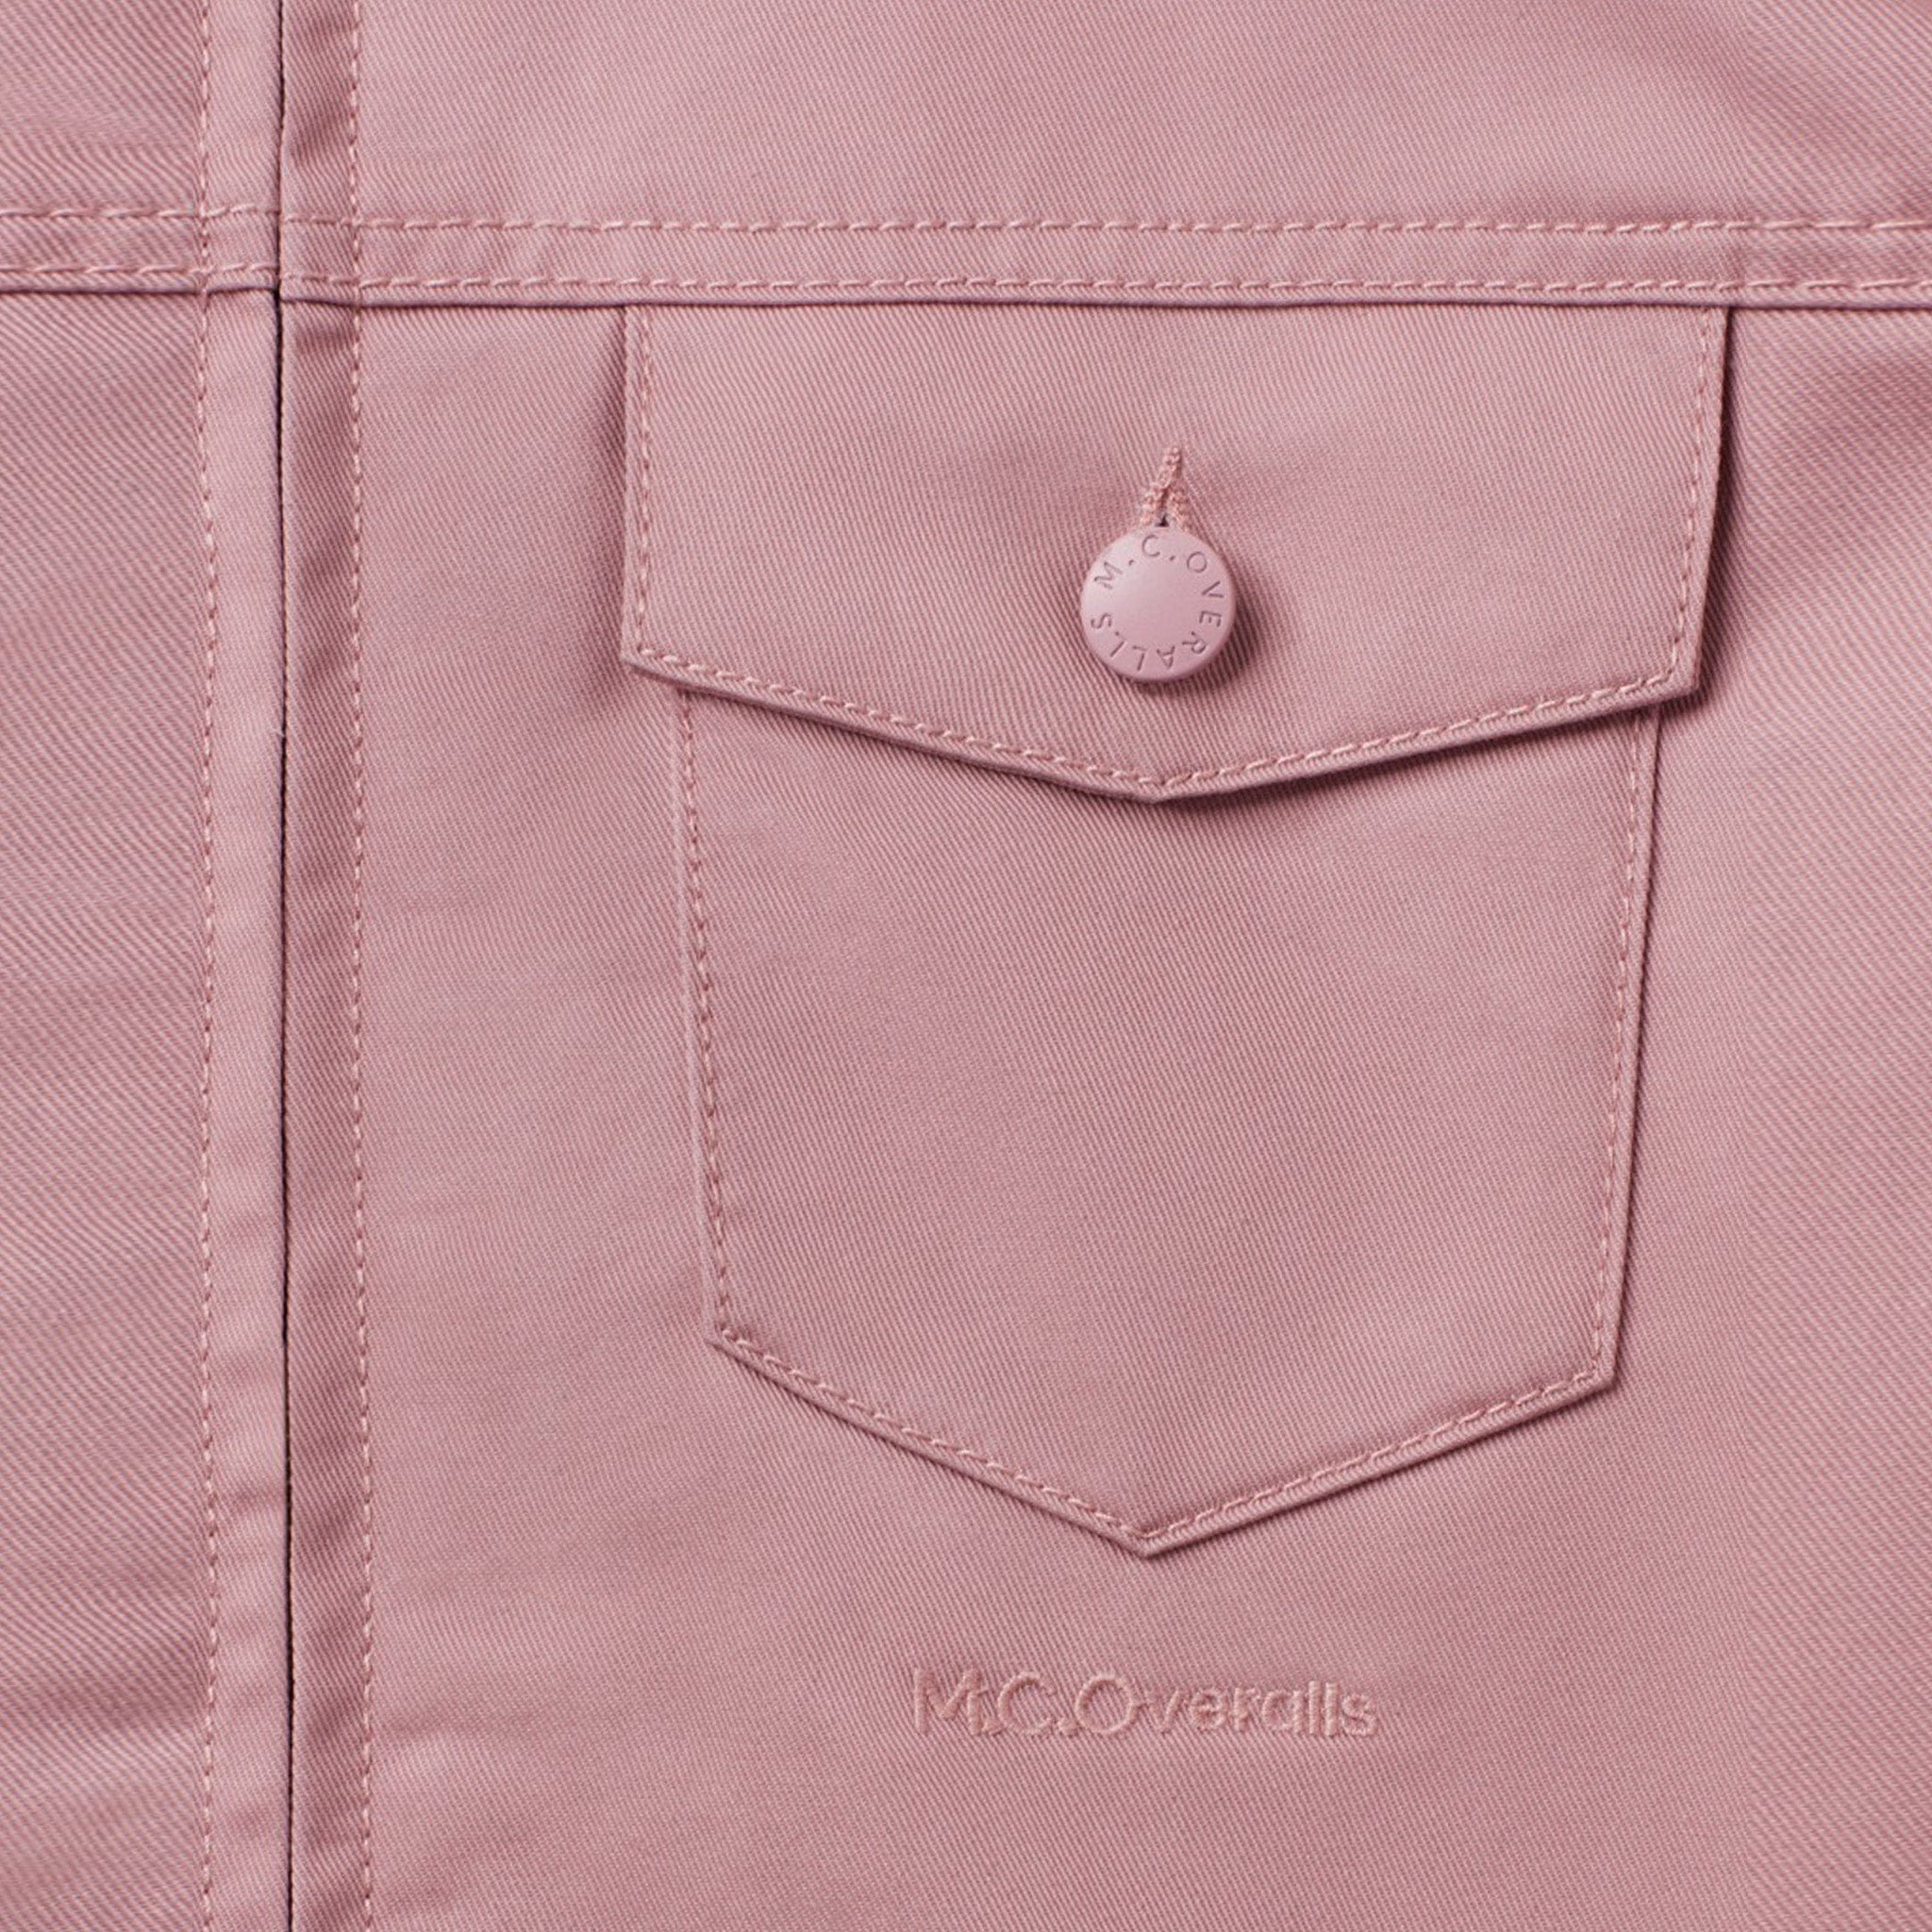 Collared Zip Overall Dusty Pink